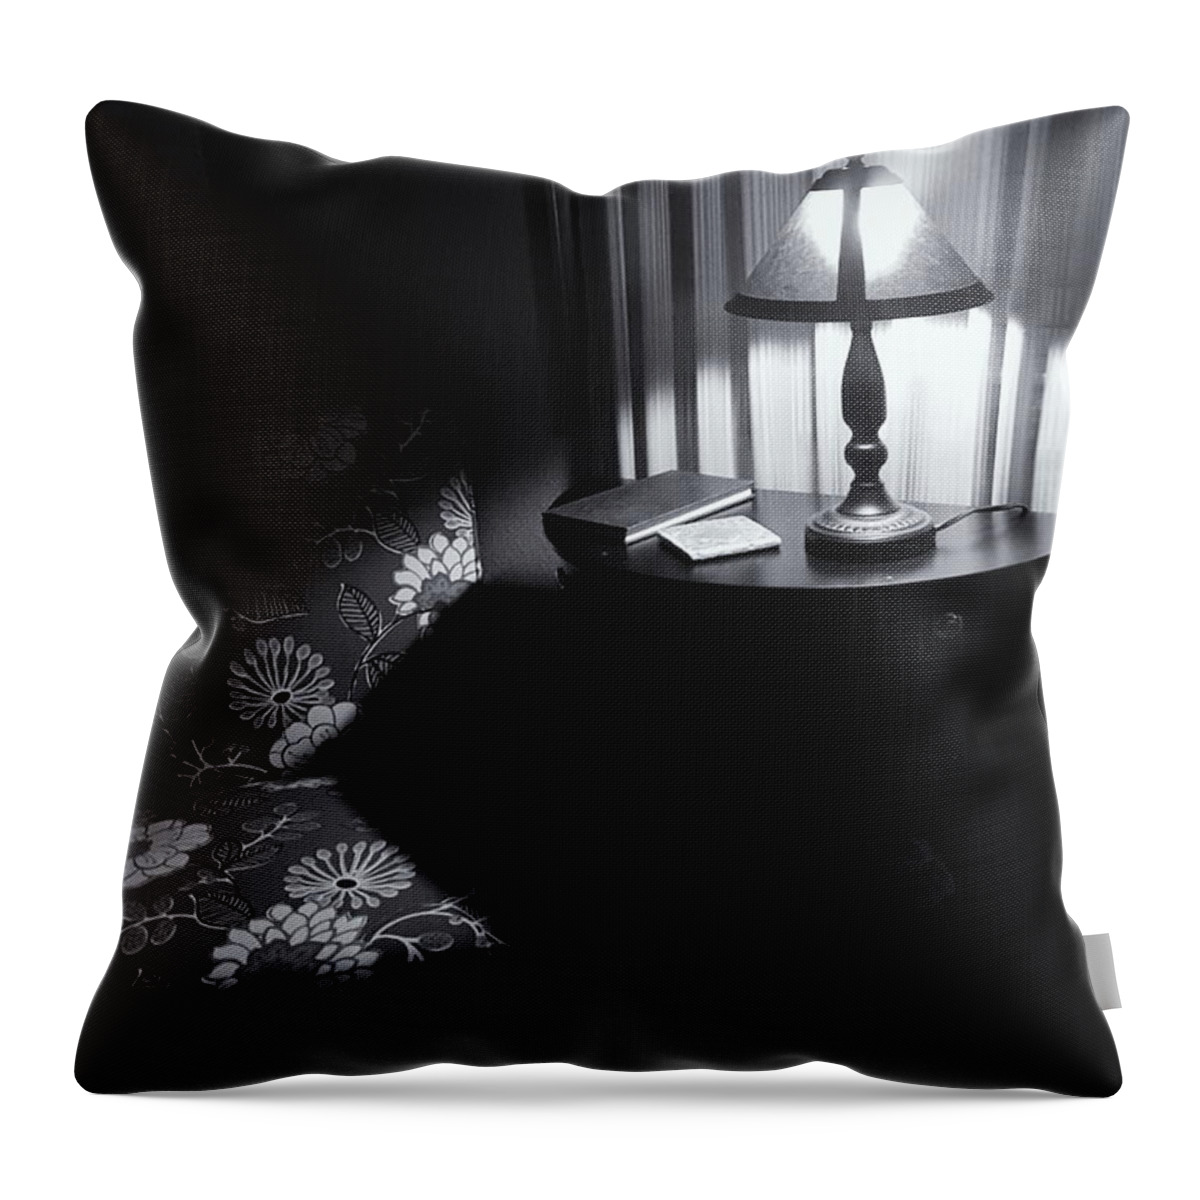 Black And White Throw Pillow featuring the photograph Reading Corner by Bonnie Bruno